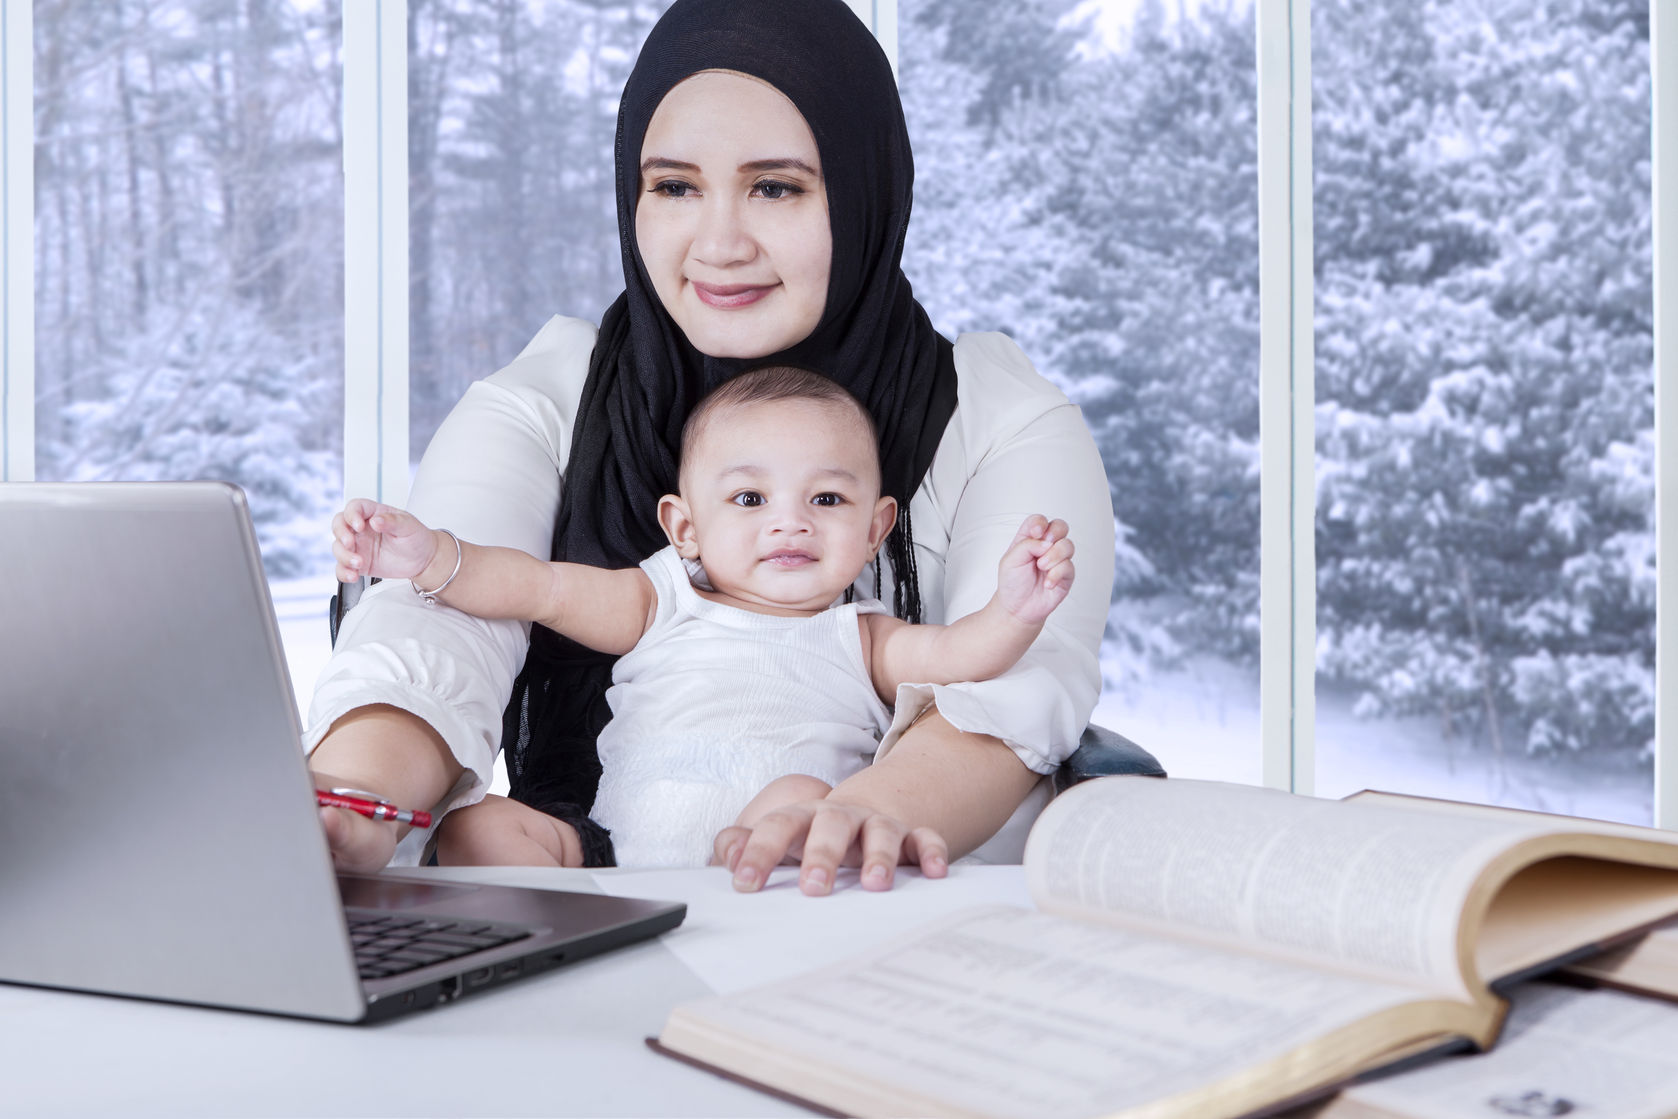 Woman wearing a hijab with a baby on lap sitting on a computer. 